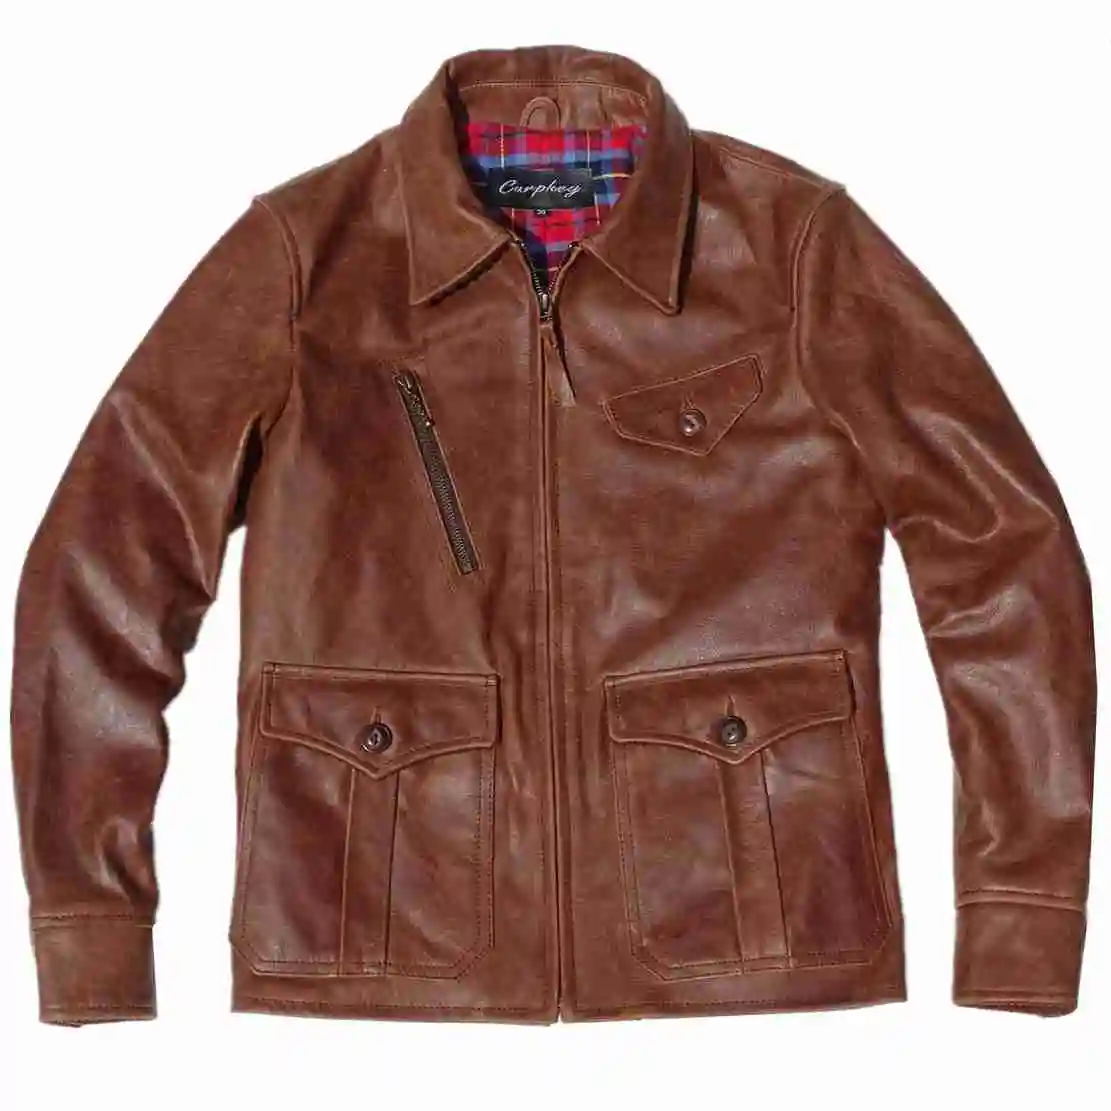 

Men's Leather Jacket Cowhide Newsboy Safari Motorcycle Style America Vintage Clothes